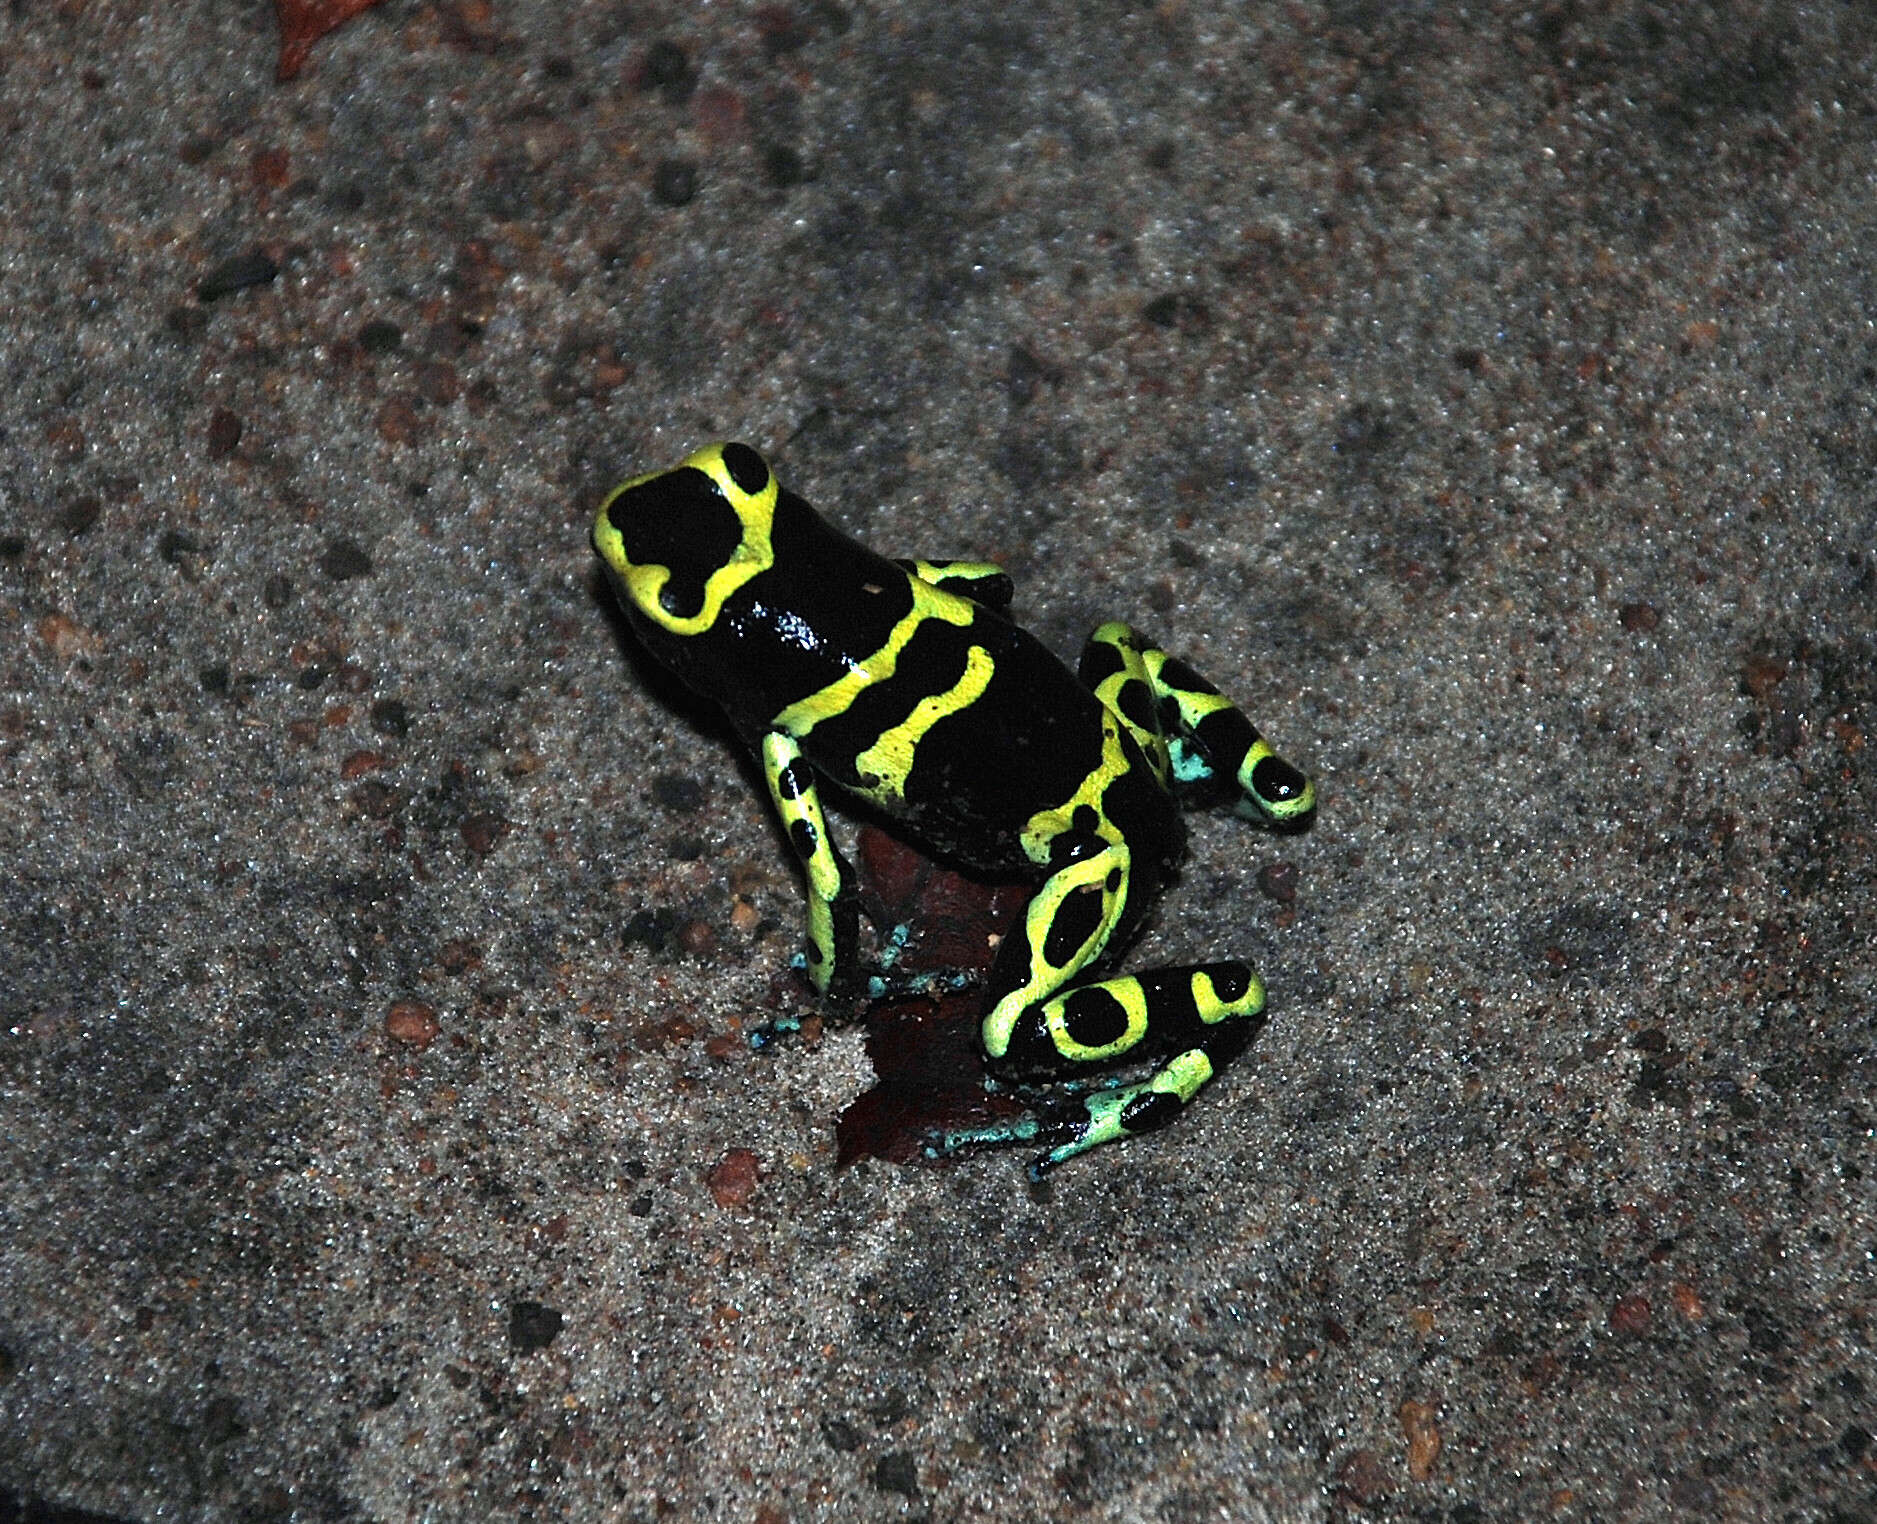 Image of Yellow-headed Poison Frog